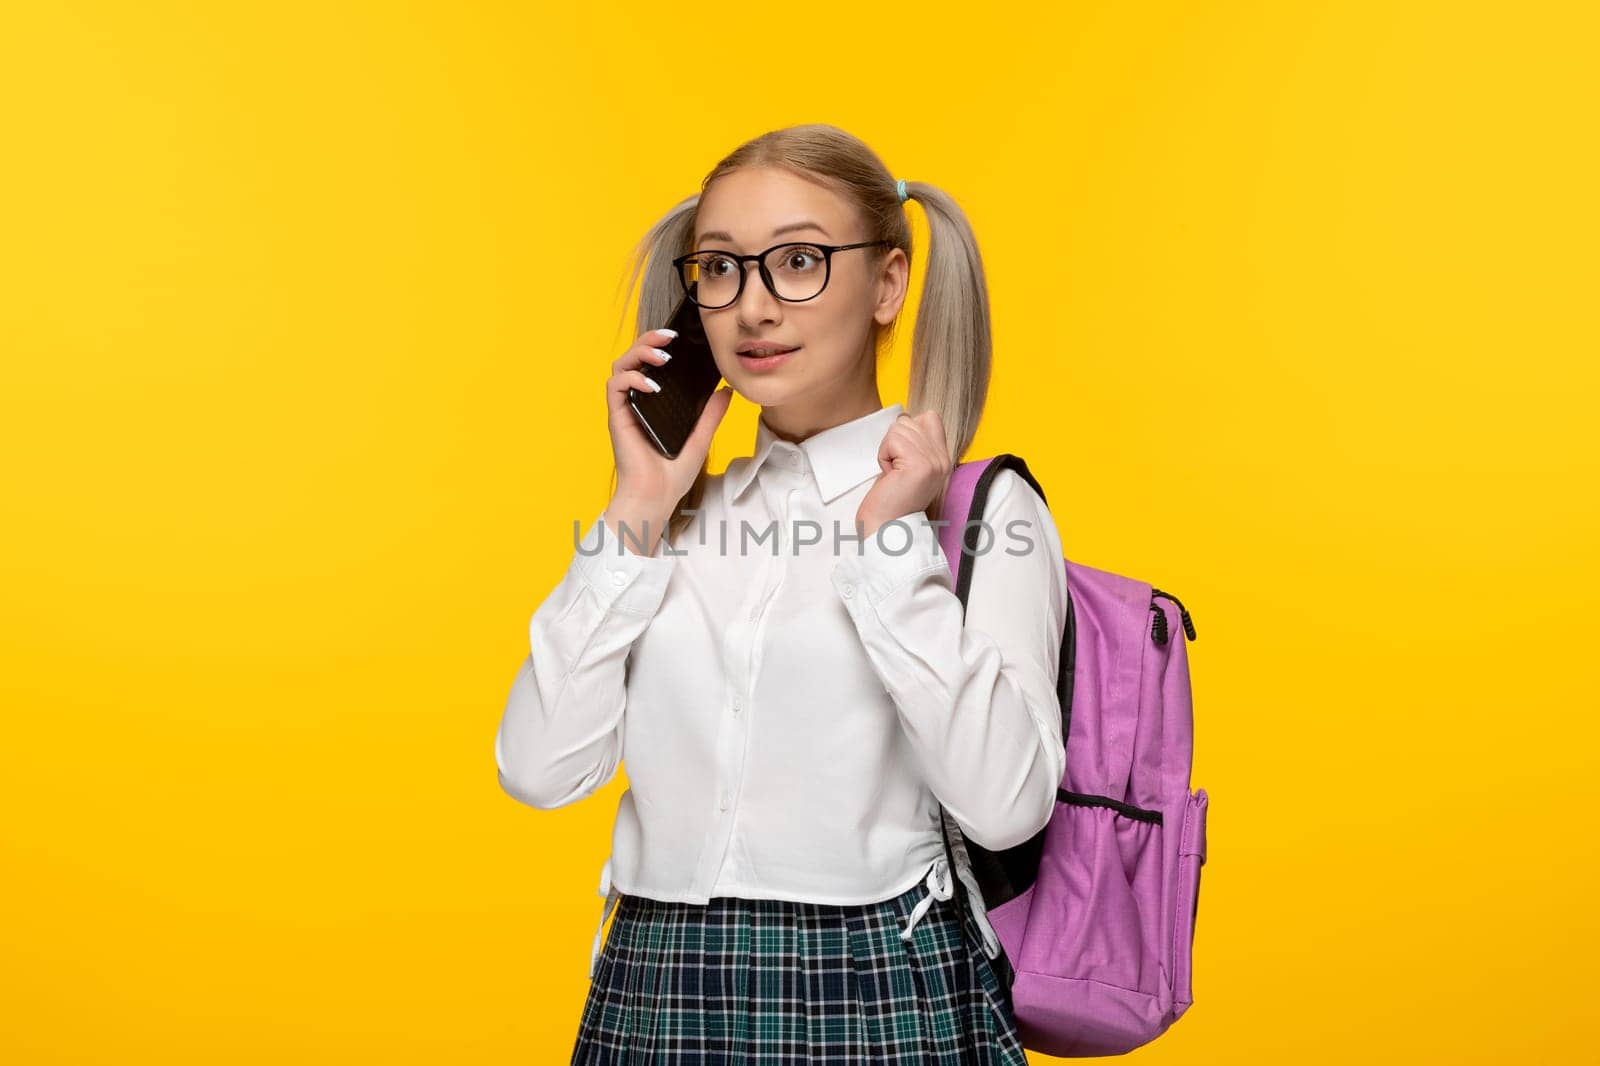 world book day blonde schoolgirl talking on the cellphone on yellow background